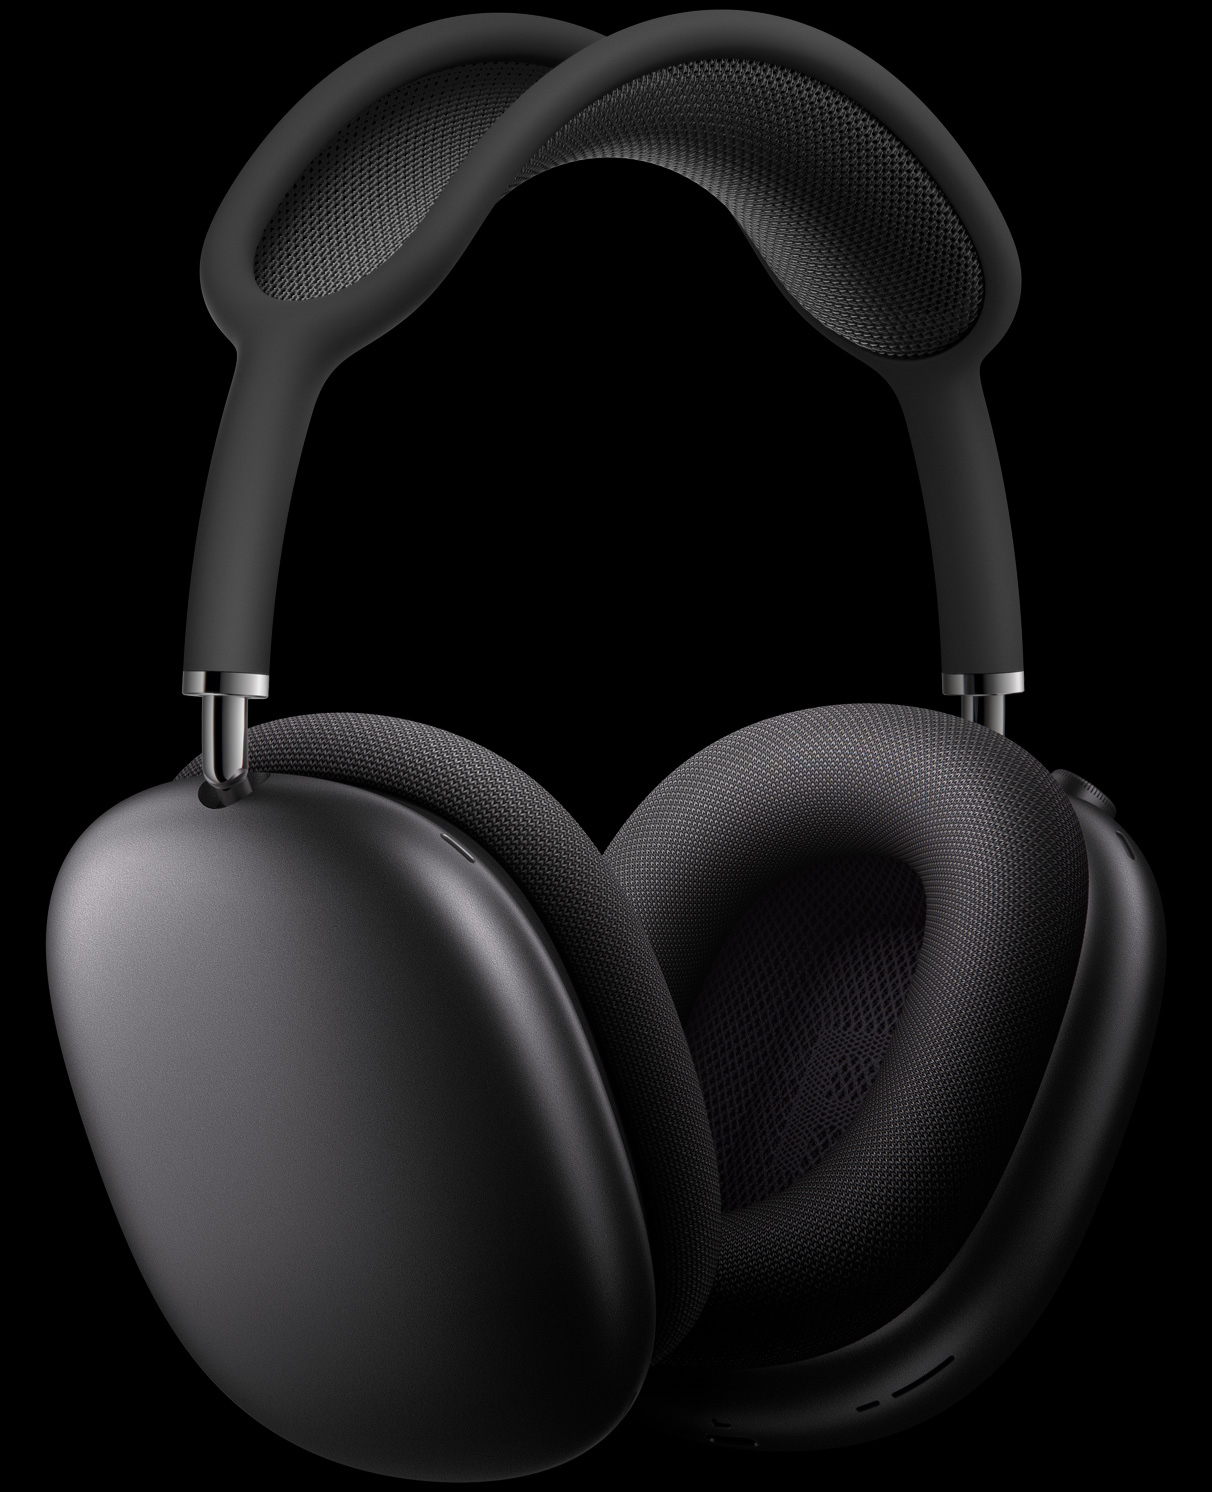 AirPods Max in Space Grey at three-quarters perspective, with external microphones relieved into ear cups.